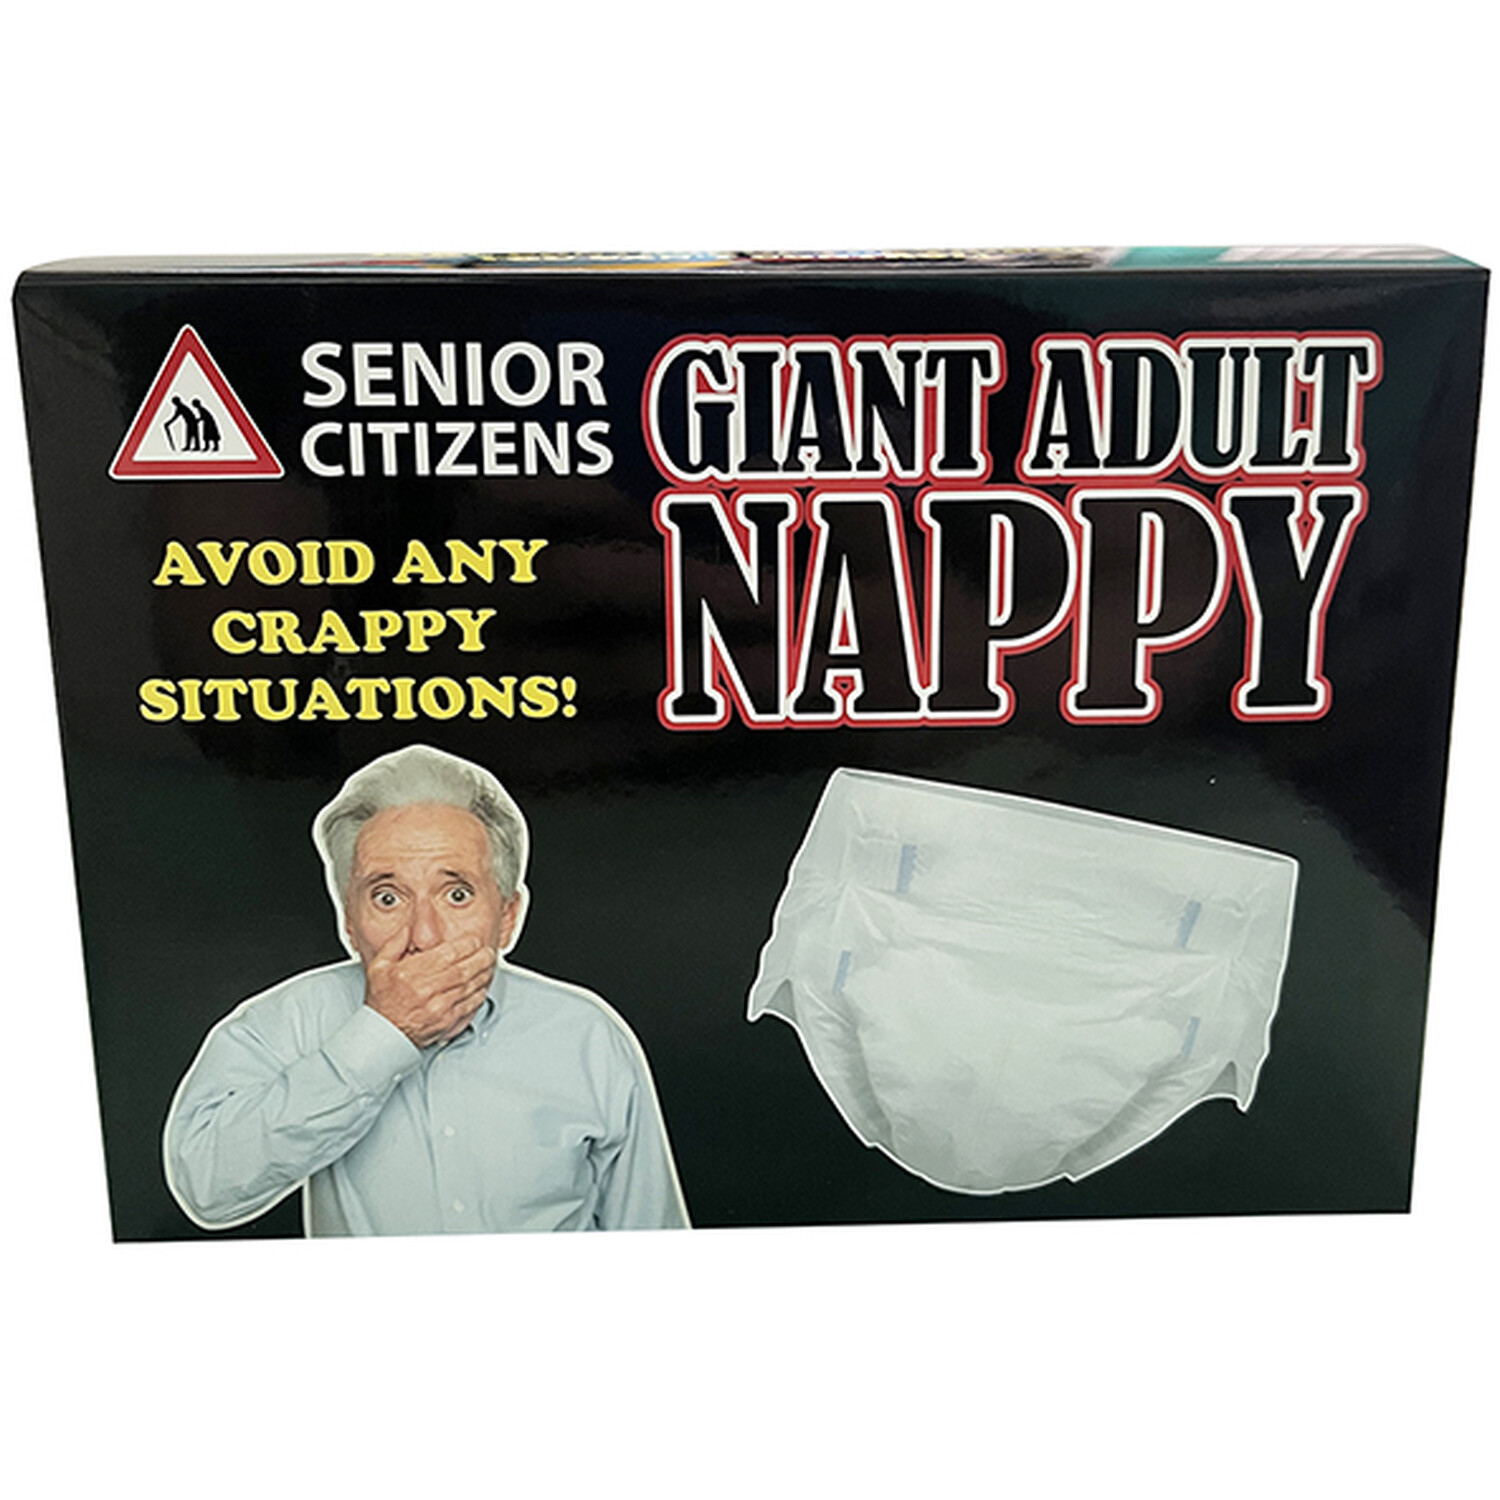 Diabolical Gifts Senior Citizens Giant Adult Nappy Image